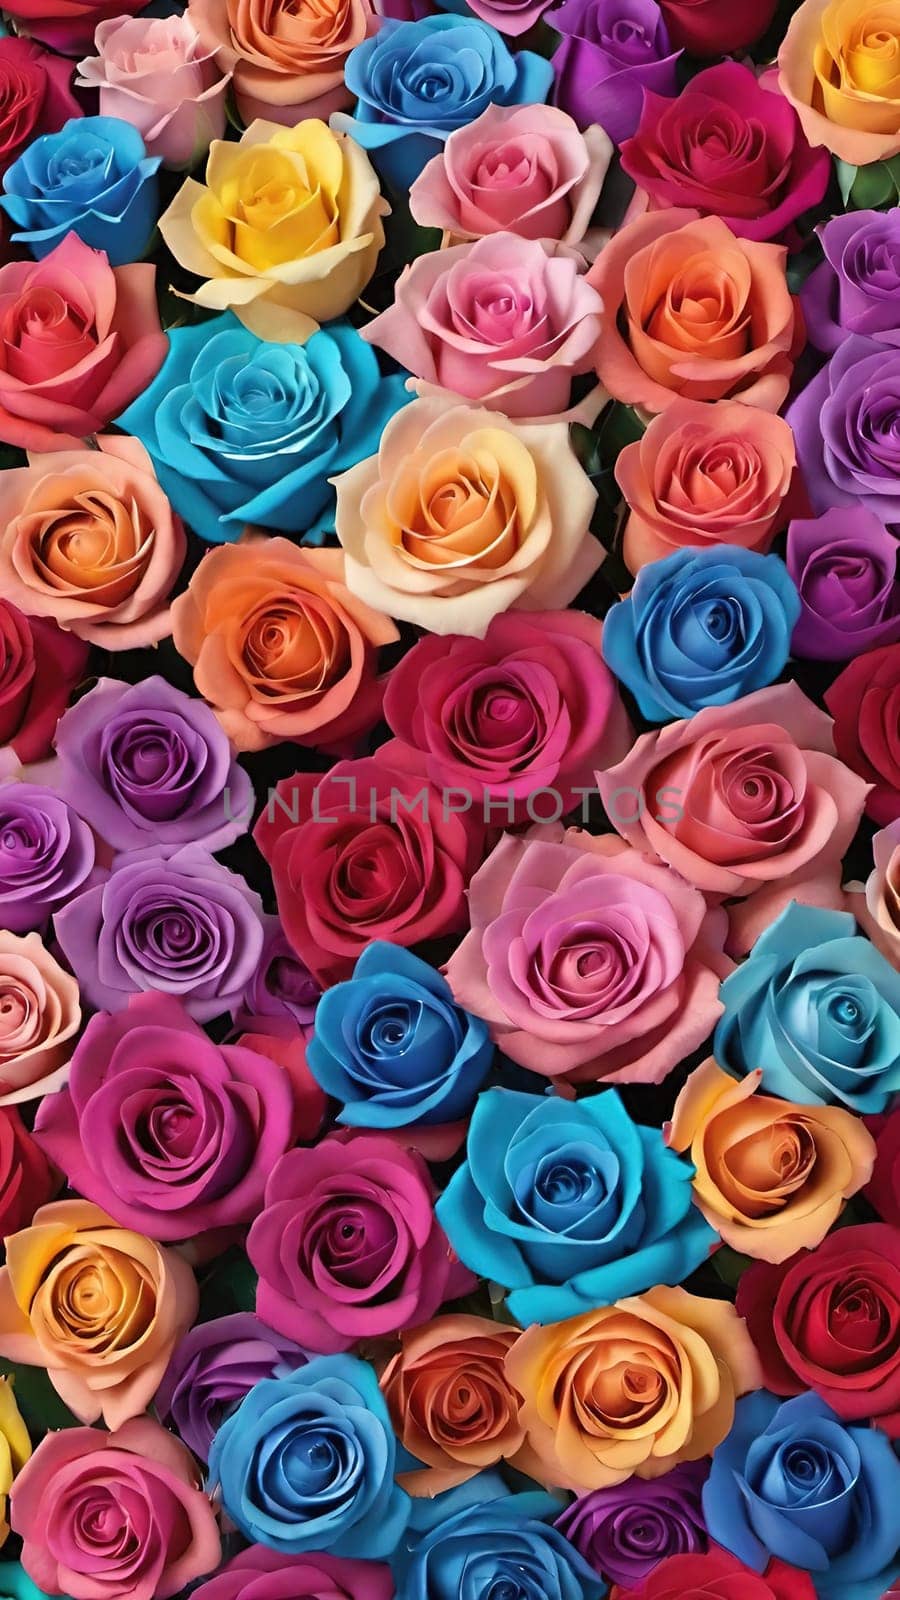 Multicolored roses as a background, top view, close up.Multi-colored roses in a floral arrangement as a background.Bouquet of colorful roses close-up. Floral background.